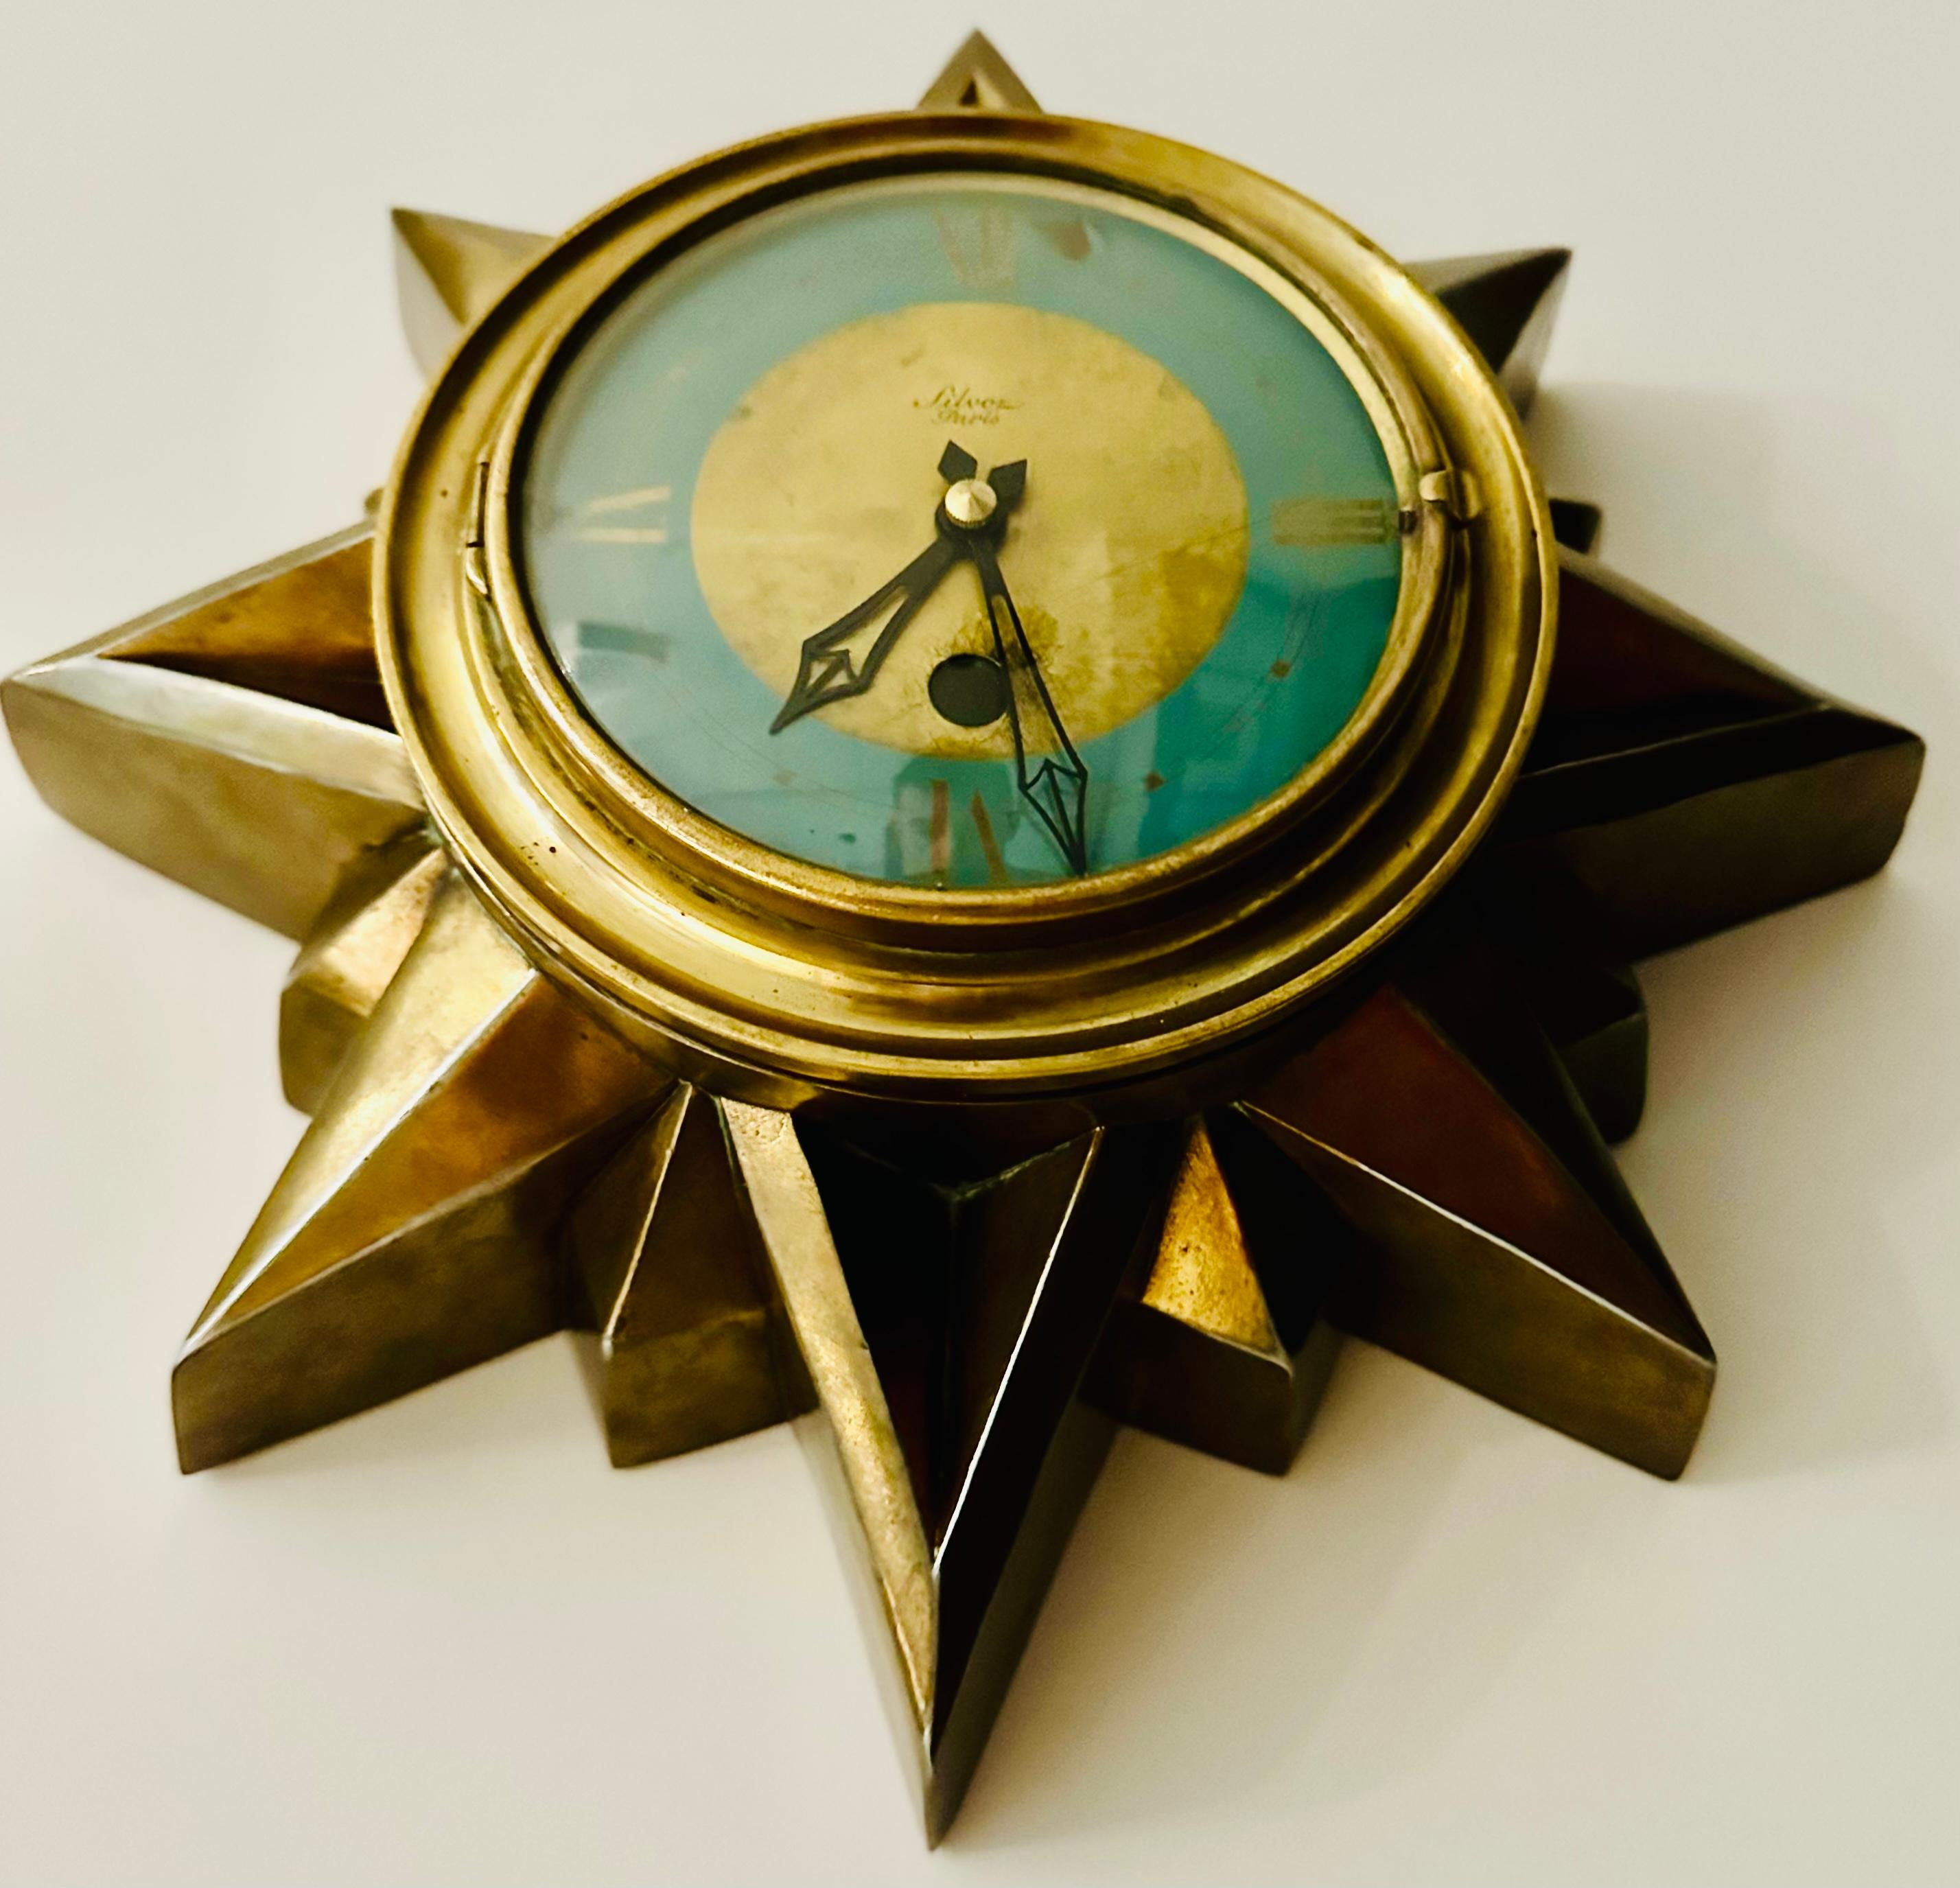 1930s French Art Deco 'Cartel Silvoz Paris' Sunburst Brass Wall Hanging Clock In Good Condition For Sale In London, GB